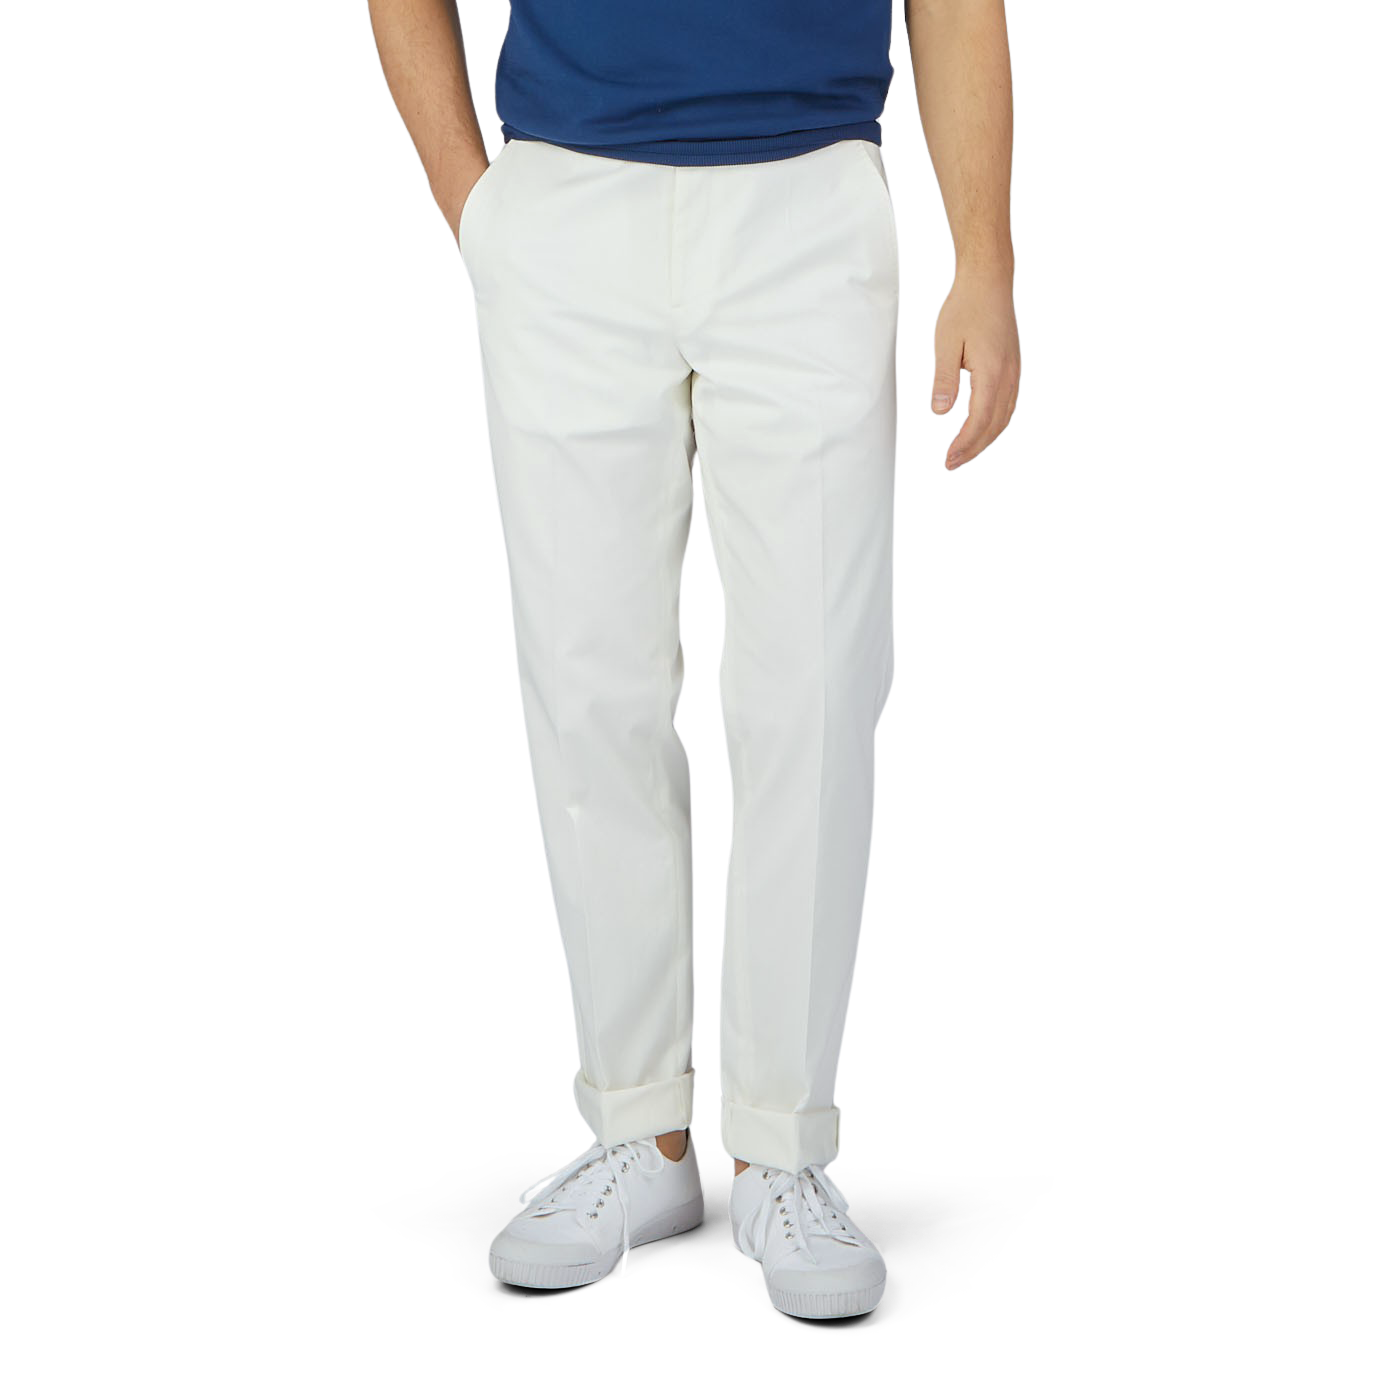 Buy White Men Pant Cotton Handloom for Best Price, Reviews, Free Shipping